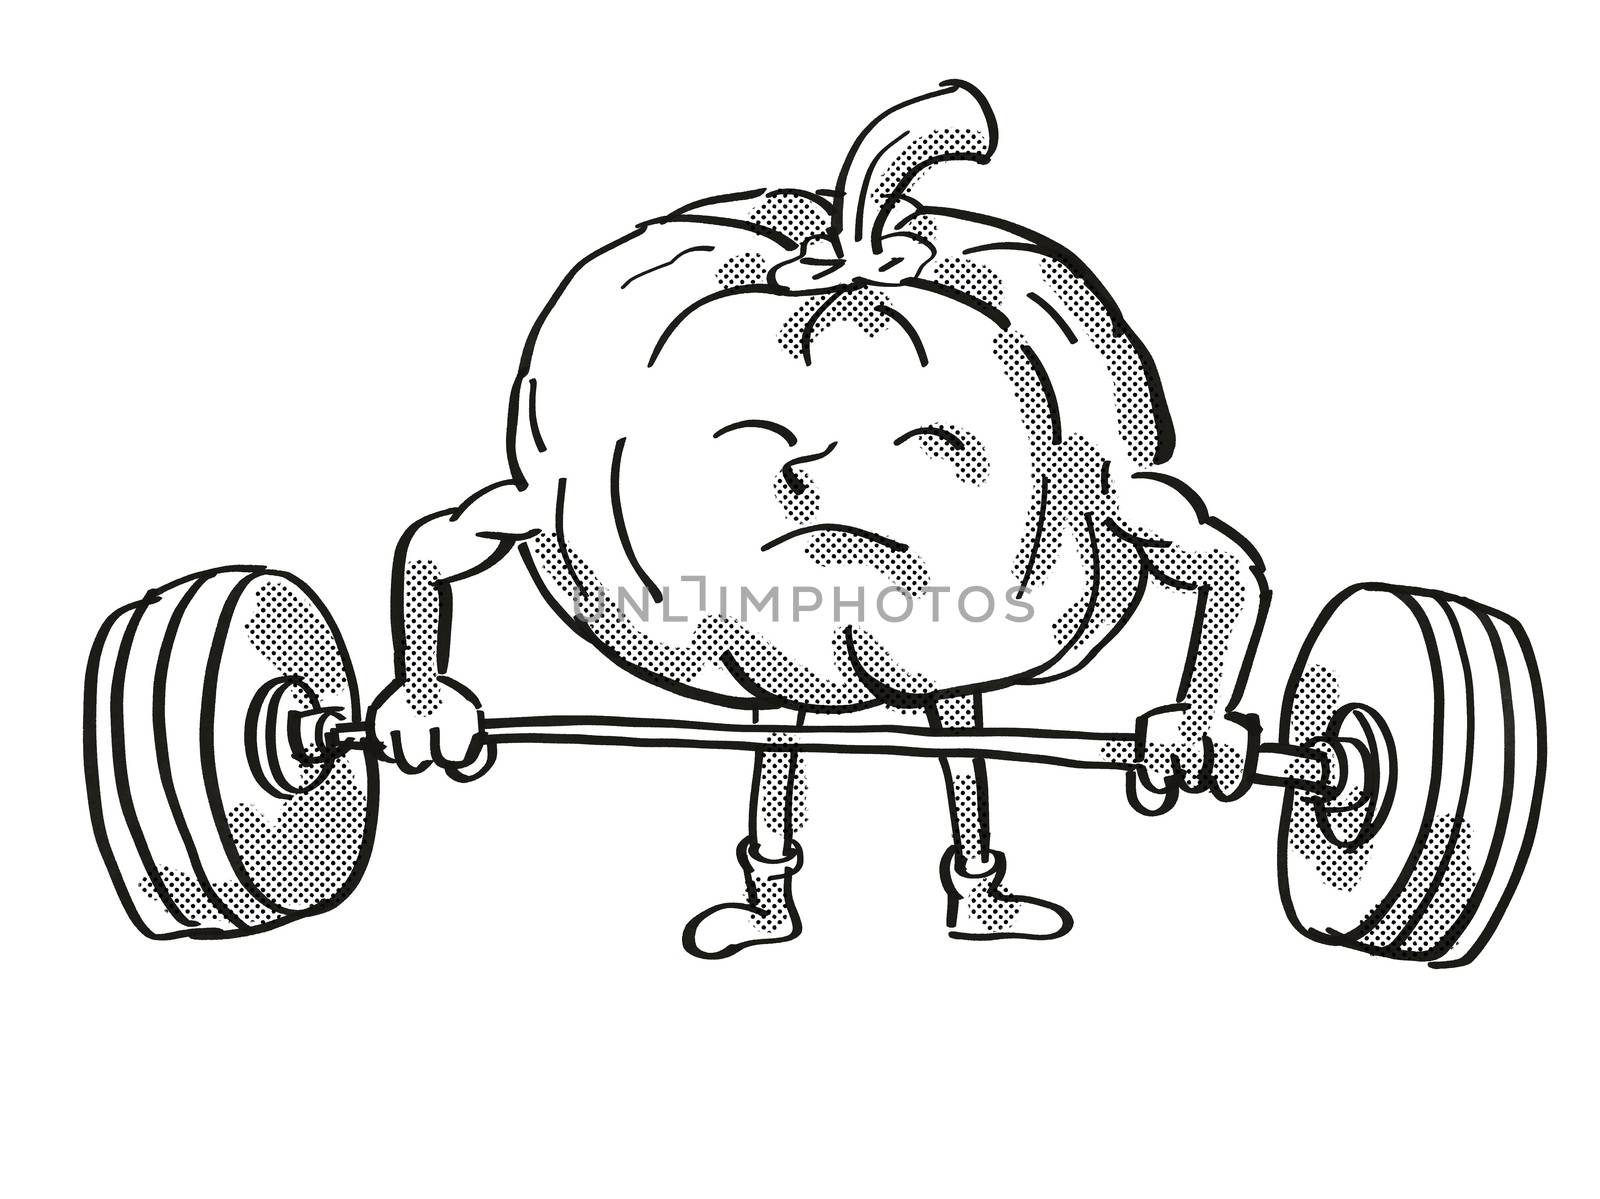 Retro cartoon style drawing of a Pumpkin or Squash, a healthy vegetable lifting a barbell on isolated white background done in black and white